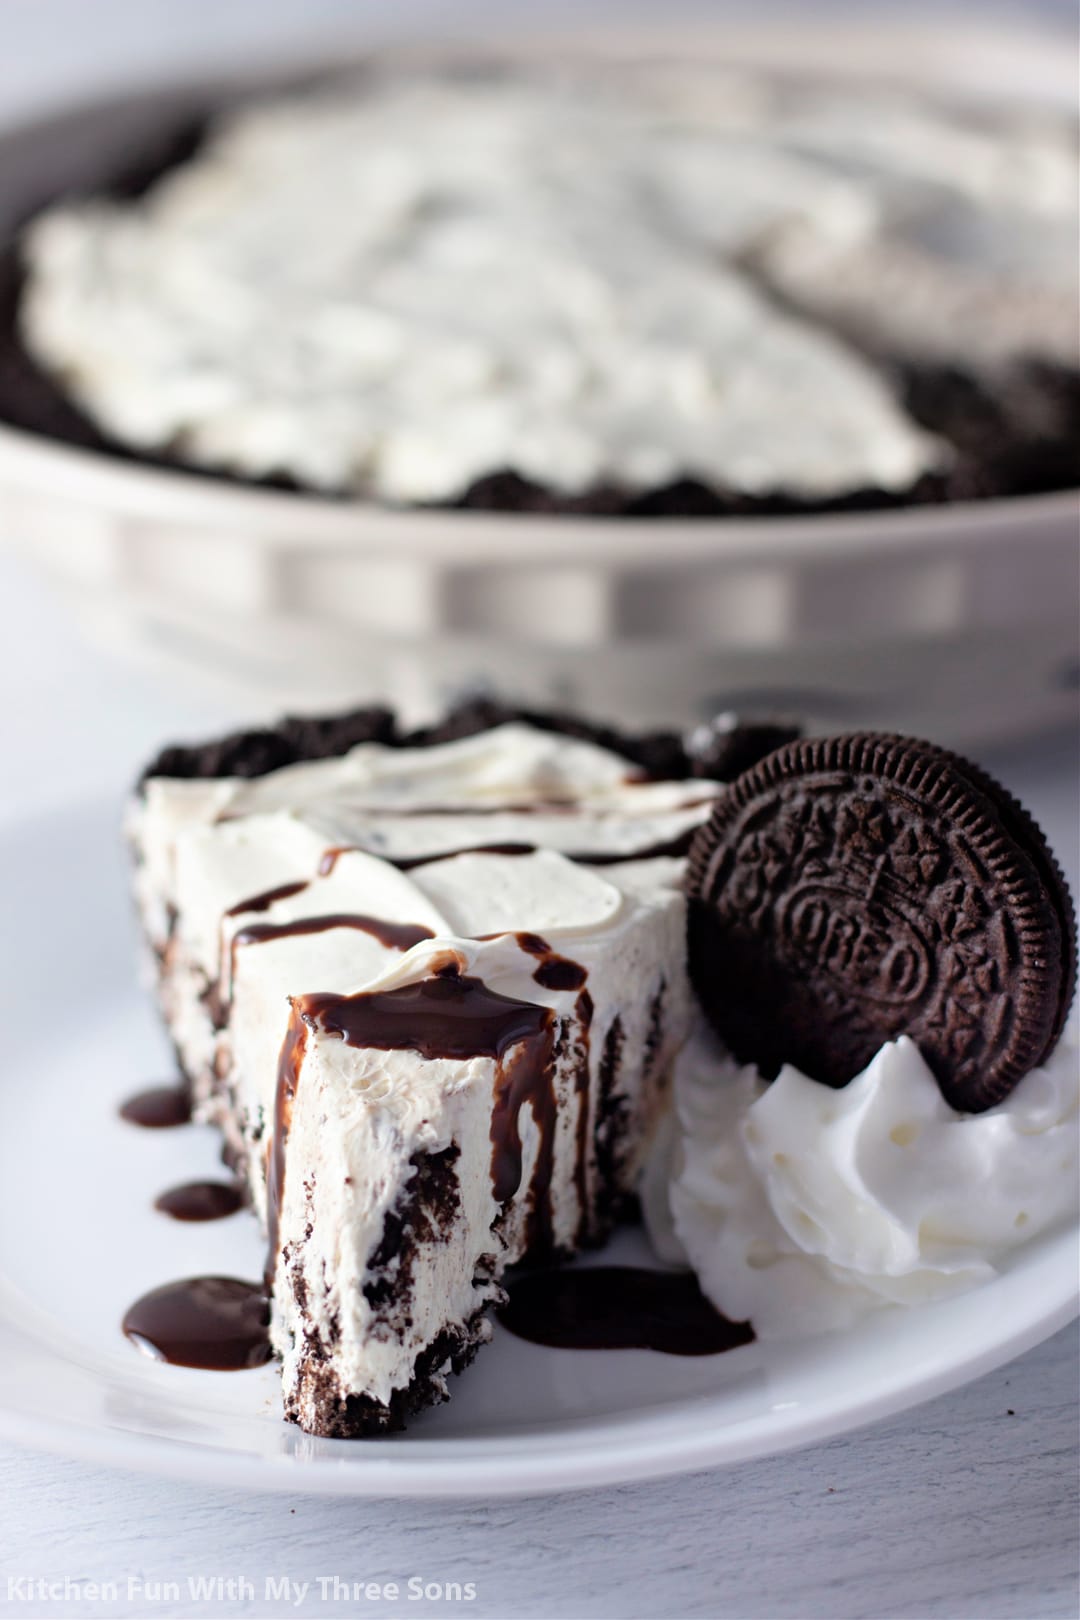 A slice of no-bake Oreo pie on a plate, drizzled with chocolate sauce next to whipped cream garnished with an Oreo cookie, with the rest of the pie in the background.